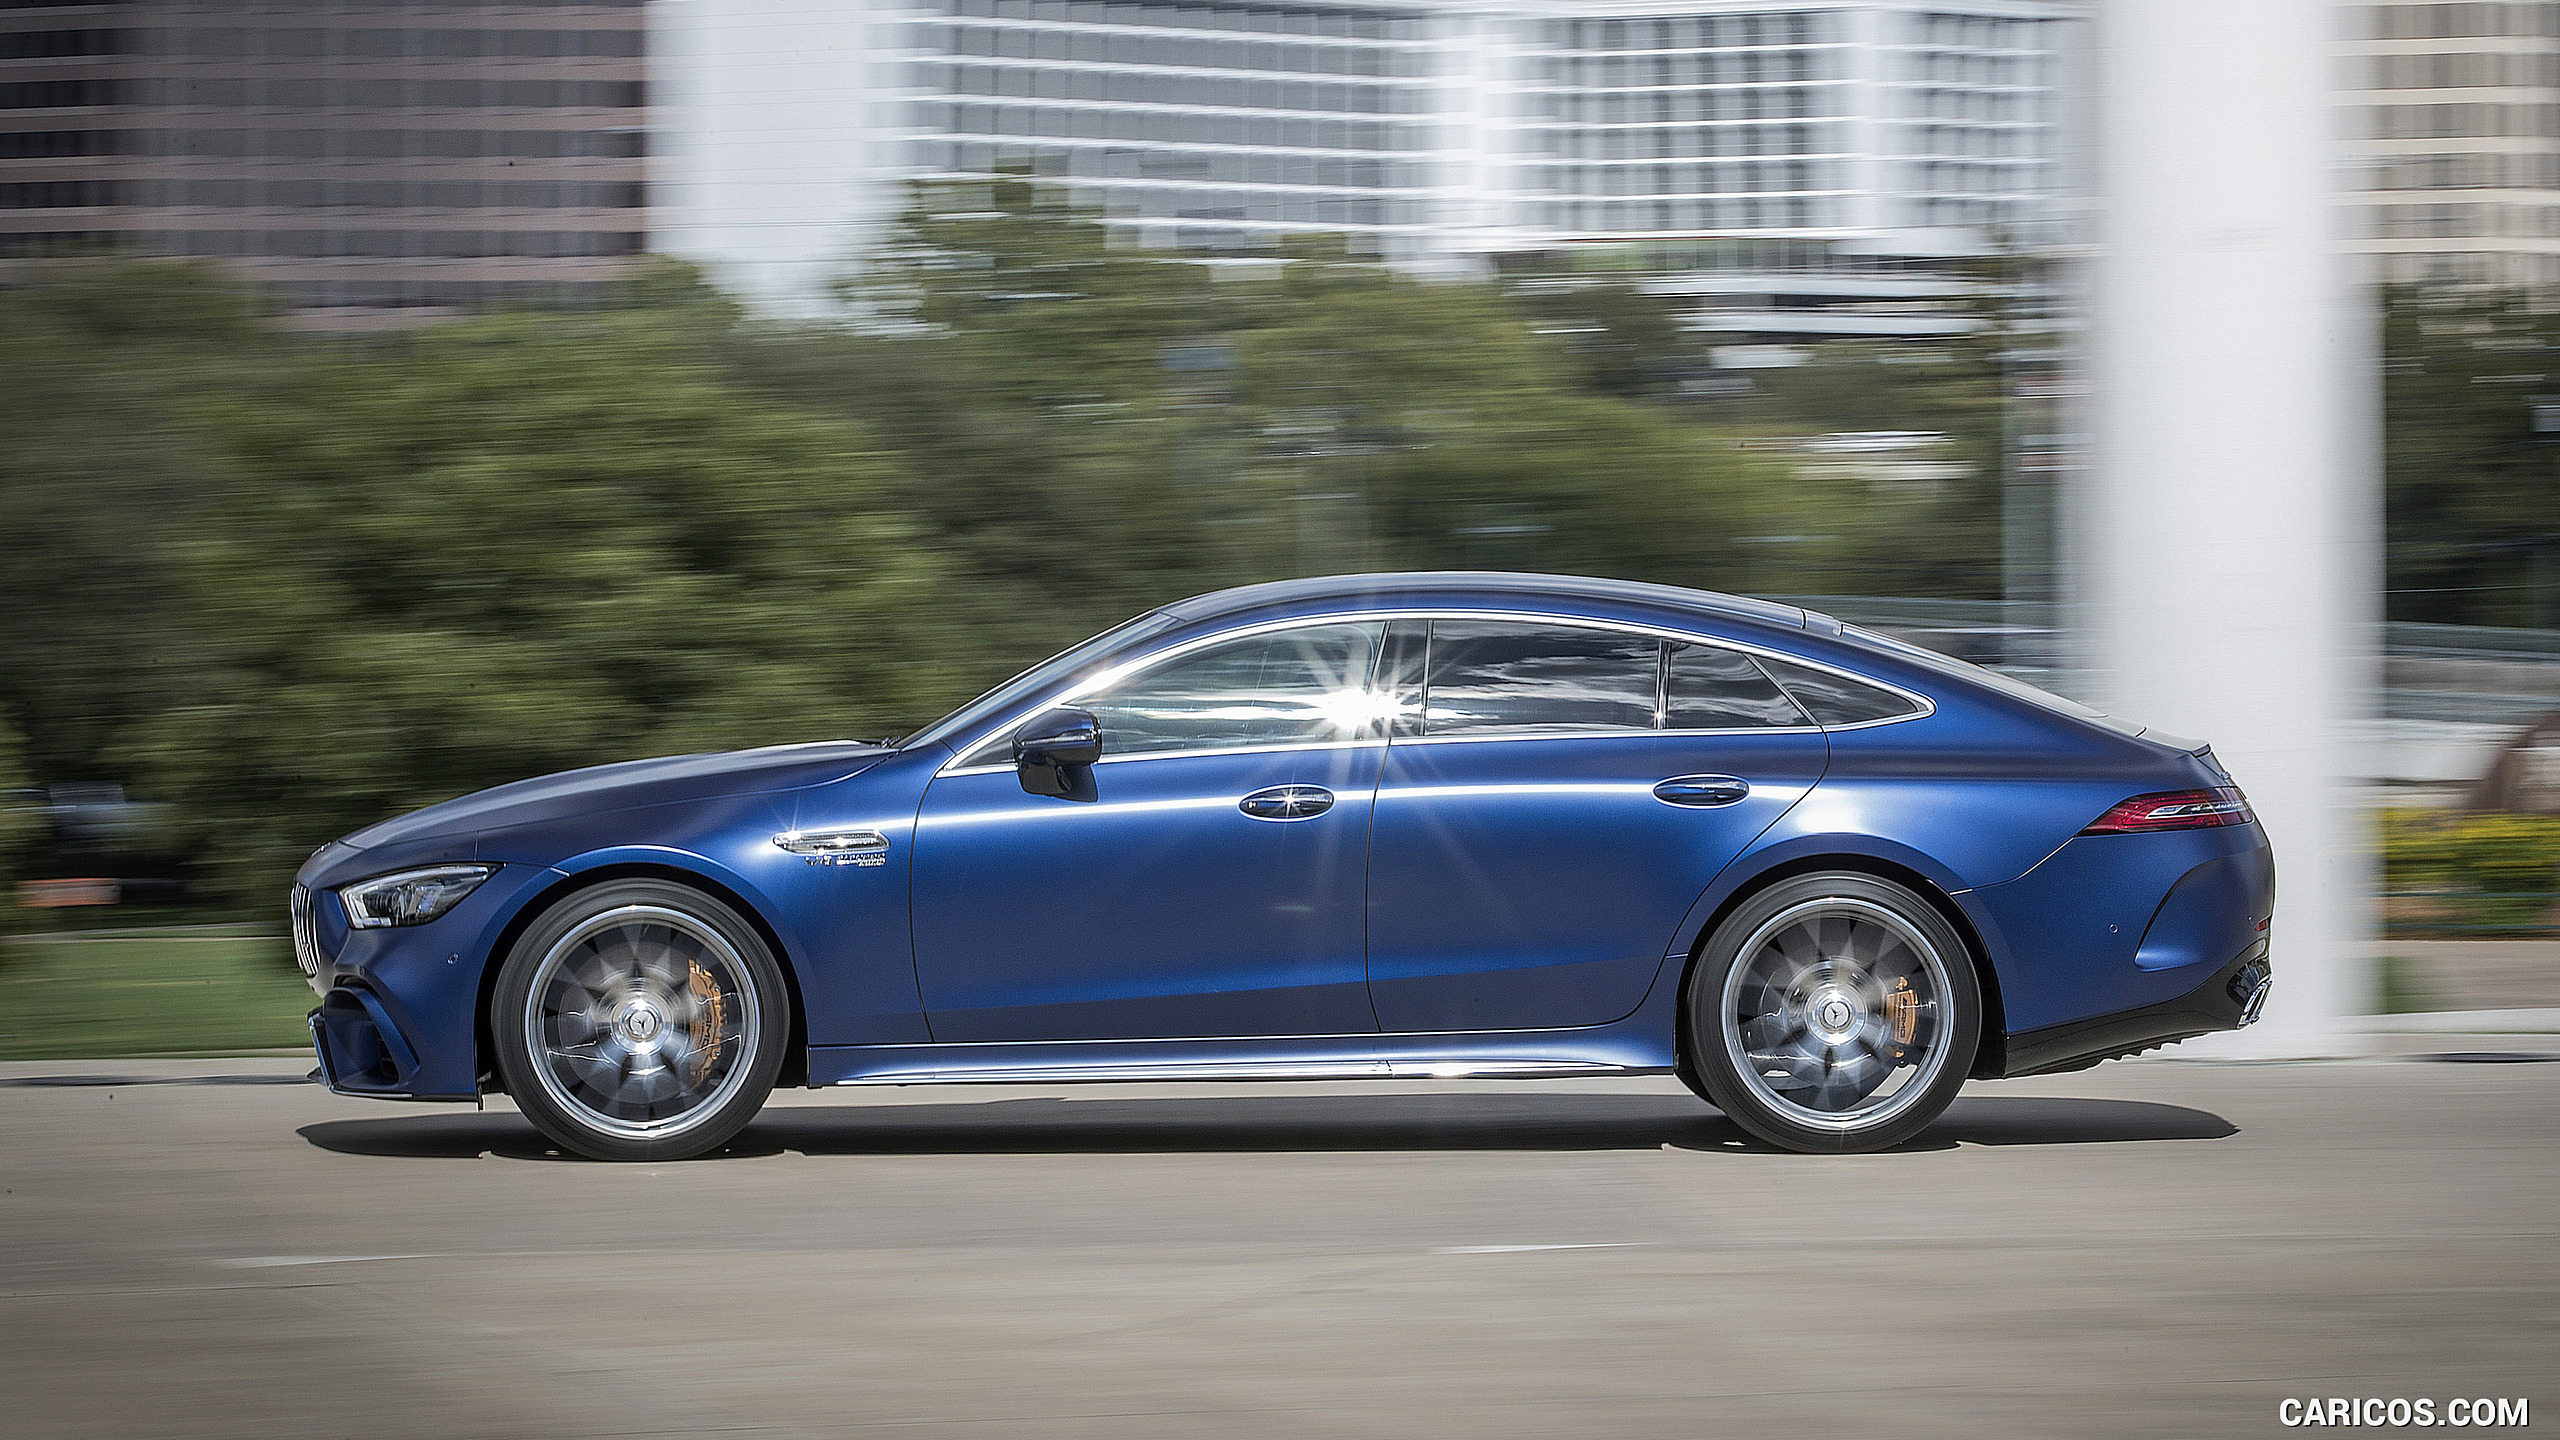 2019 Mercedes-AMG GT 63 S 4MATIC+ 4-Door Coupe - Side, #117 of 427